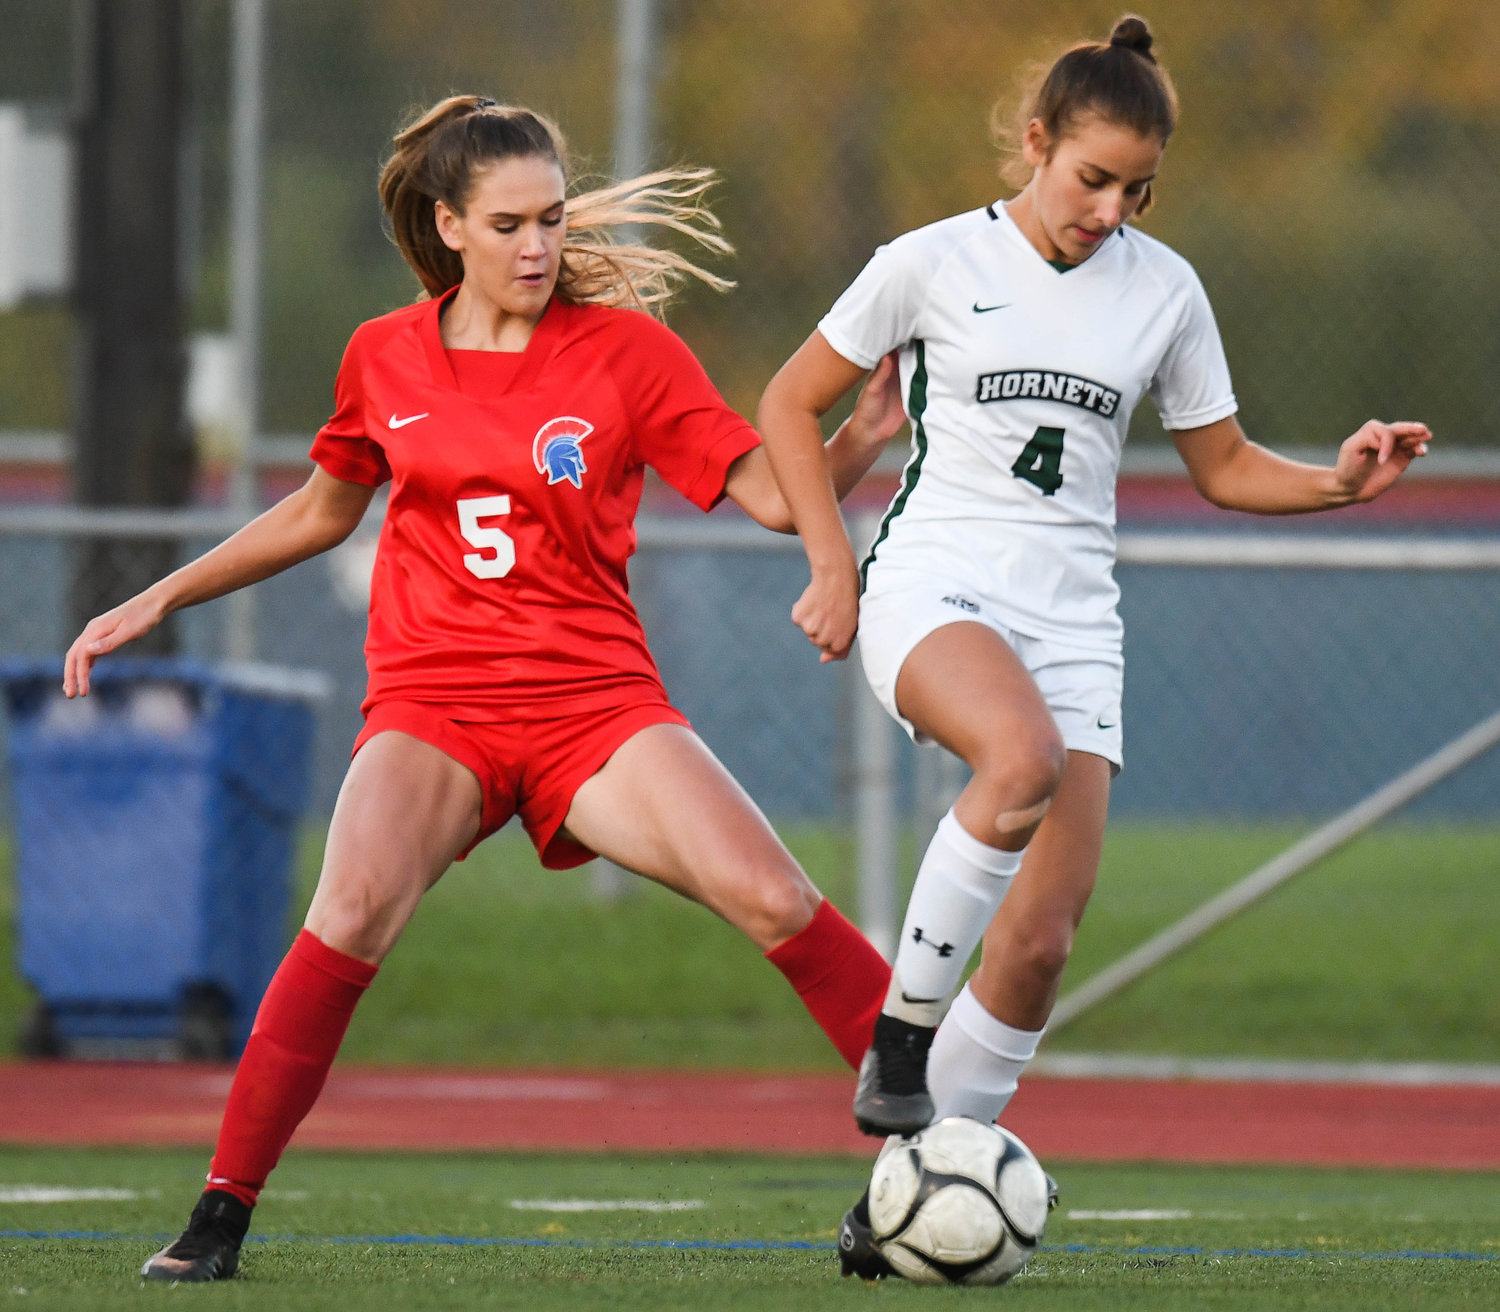 New Hartford's Alex Volo, left, fights for control of the ball against Fayetteville-Manlius' Una Vlasak during a game on Monday night in New Hartford. The Spartans won 4-0 on Senior Night, which honored nine players including Volo.